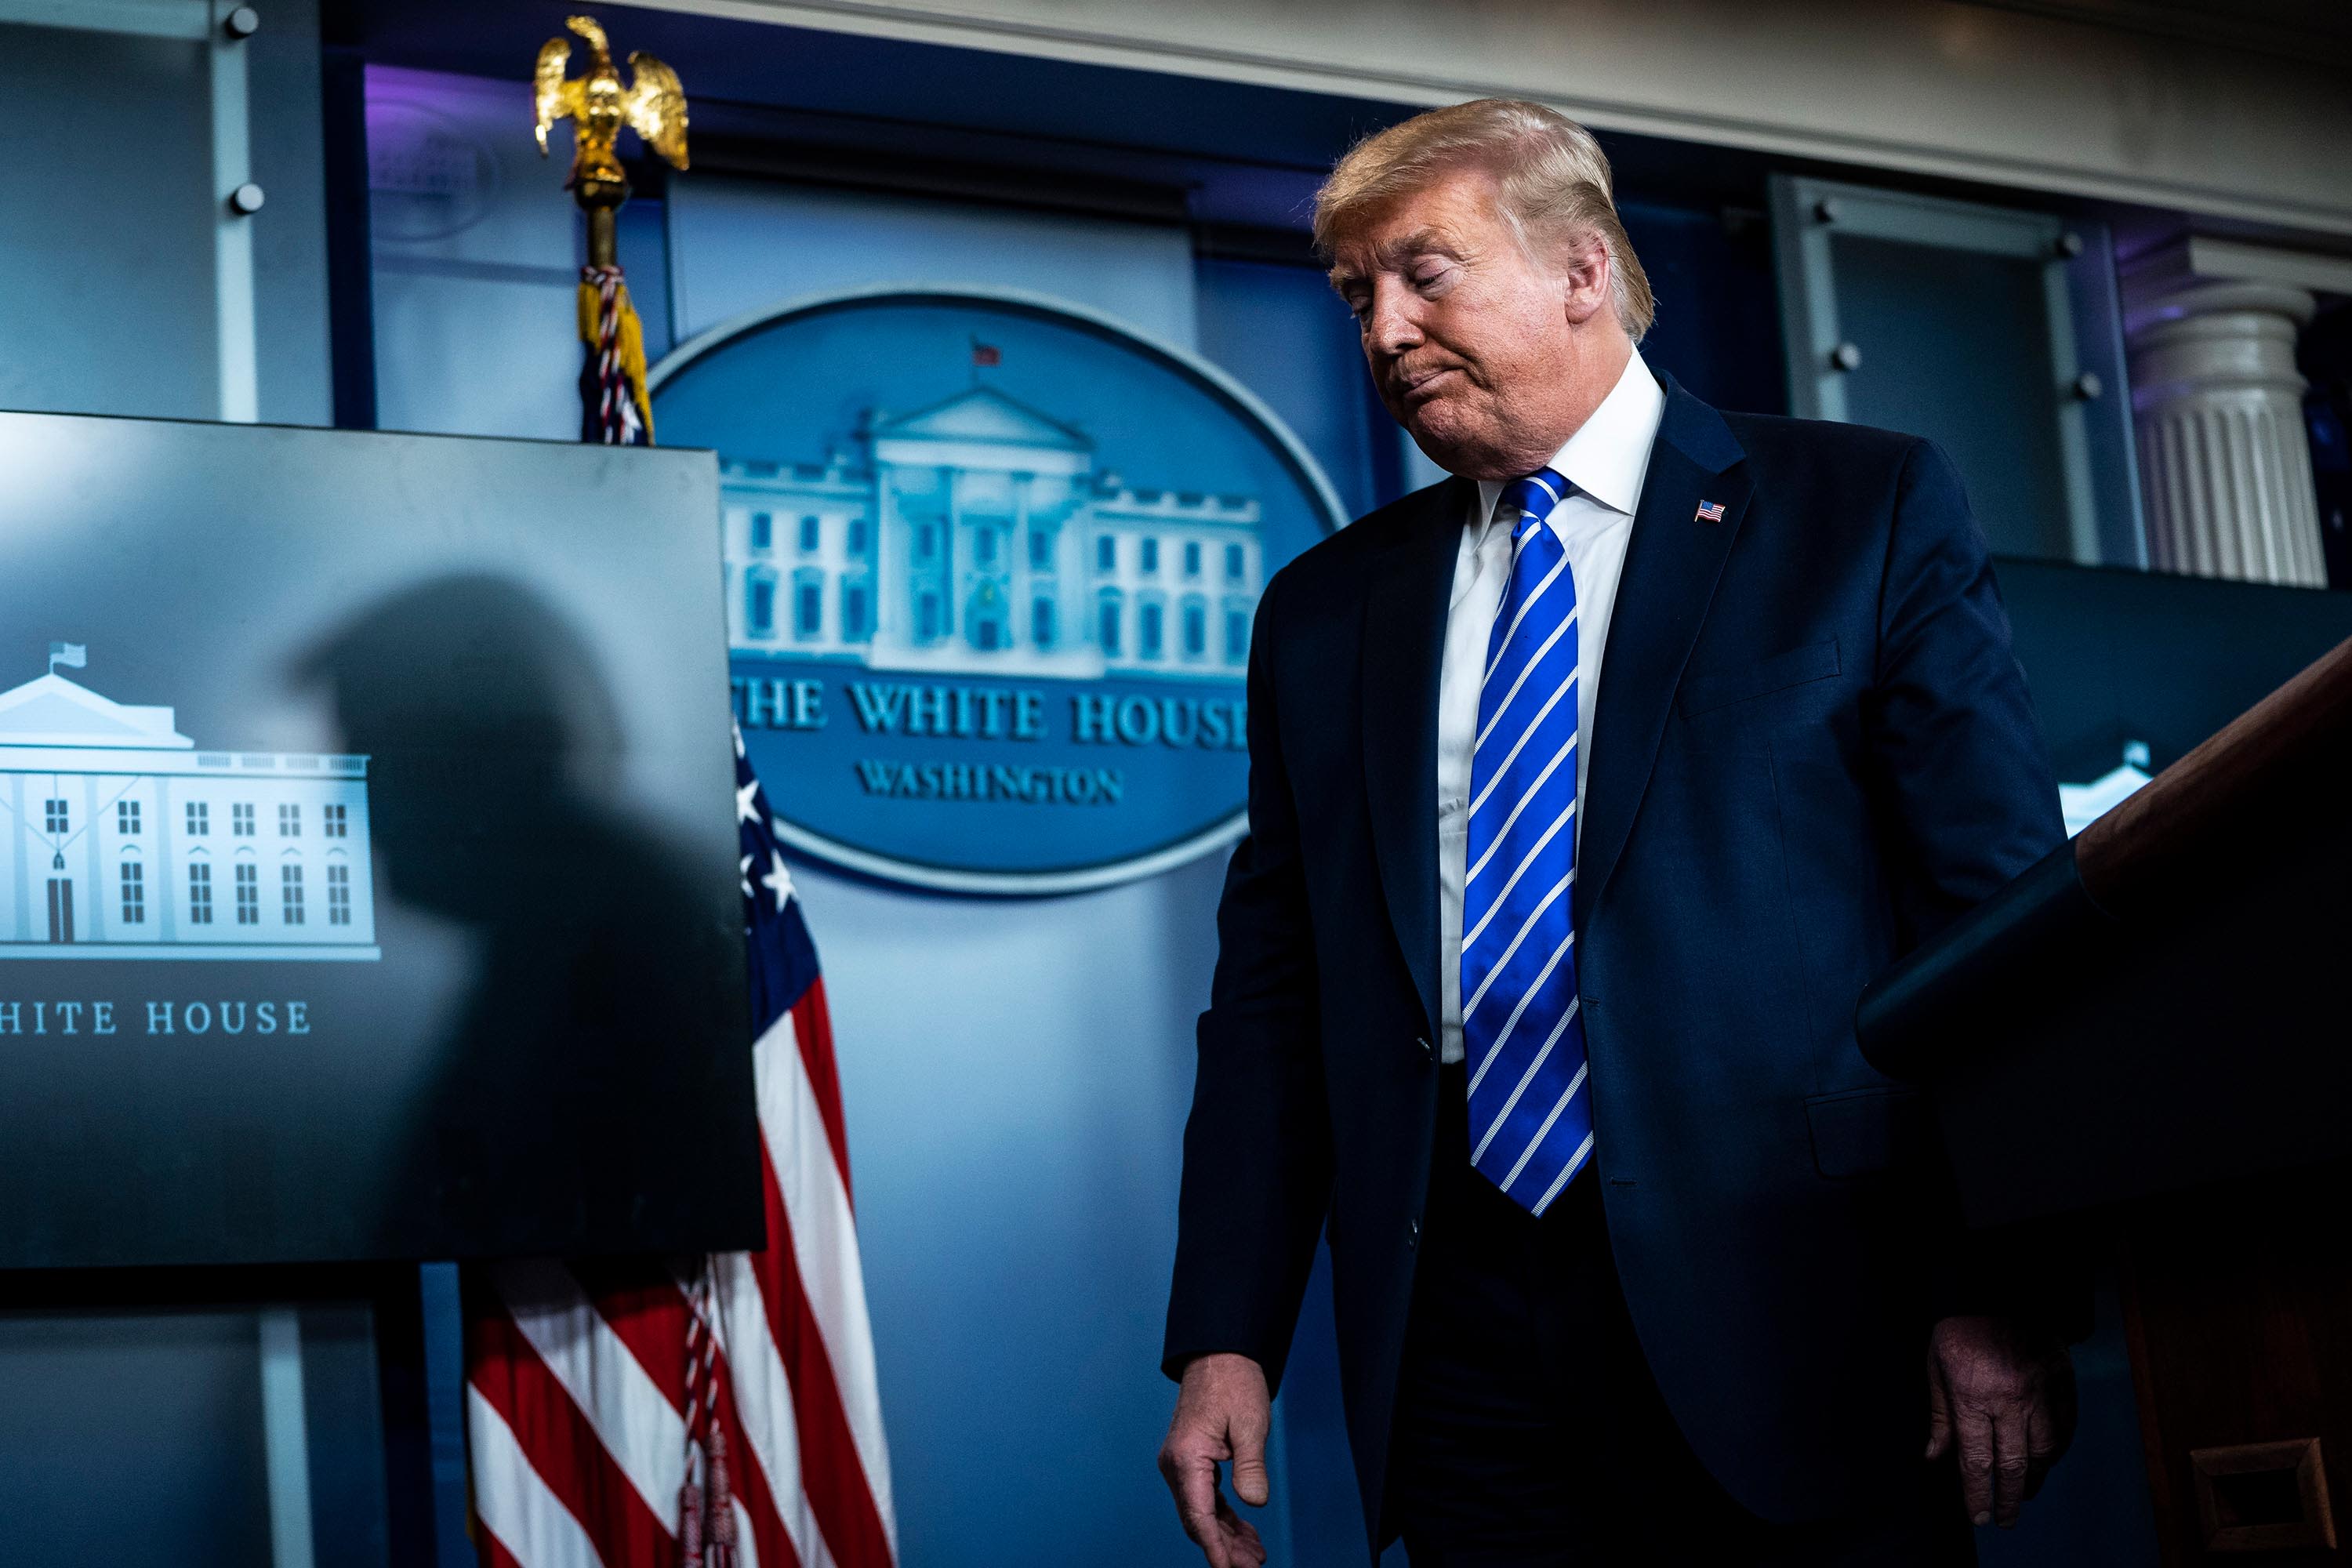 President Donald Trump leaves after the White House coronavirus briefing on April 23. During the briefing, Trump lashed out at reporters from CNN and The Washington Post who asked him questions, saying they were "fake news." It was also <a href="index.php?page=&url=https%3A%2F%2Fwww.cnn.com%2F2020%2F04%2F24%2Fpolitics%2Ffact-check-trump-disinfectant-sarcastic%2Findex.html" target="_blank">at this briefing</a> when Trump asked medical experts to look into the possibility of injecting disinfectant as a treatment for the coronavirus. He said later he was being sarcastic.